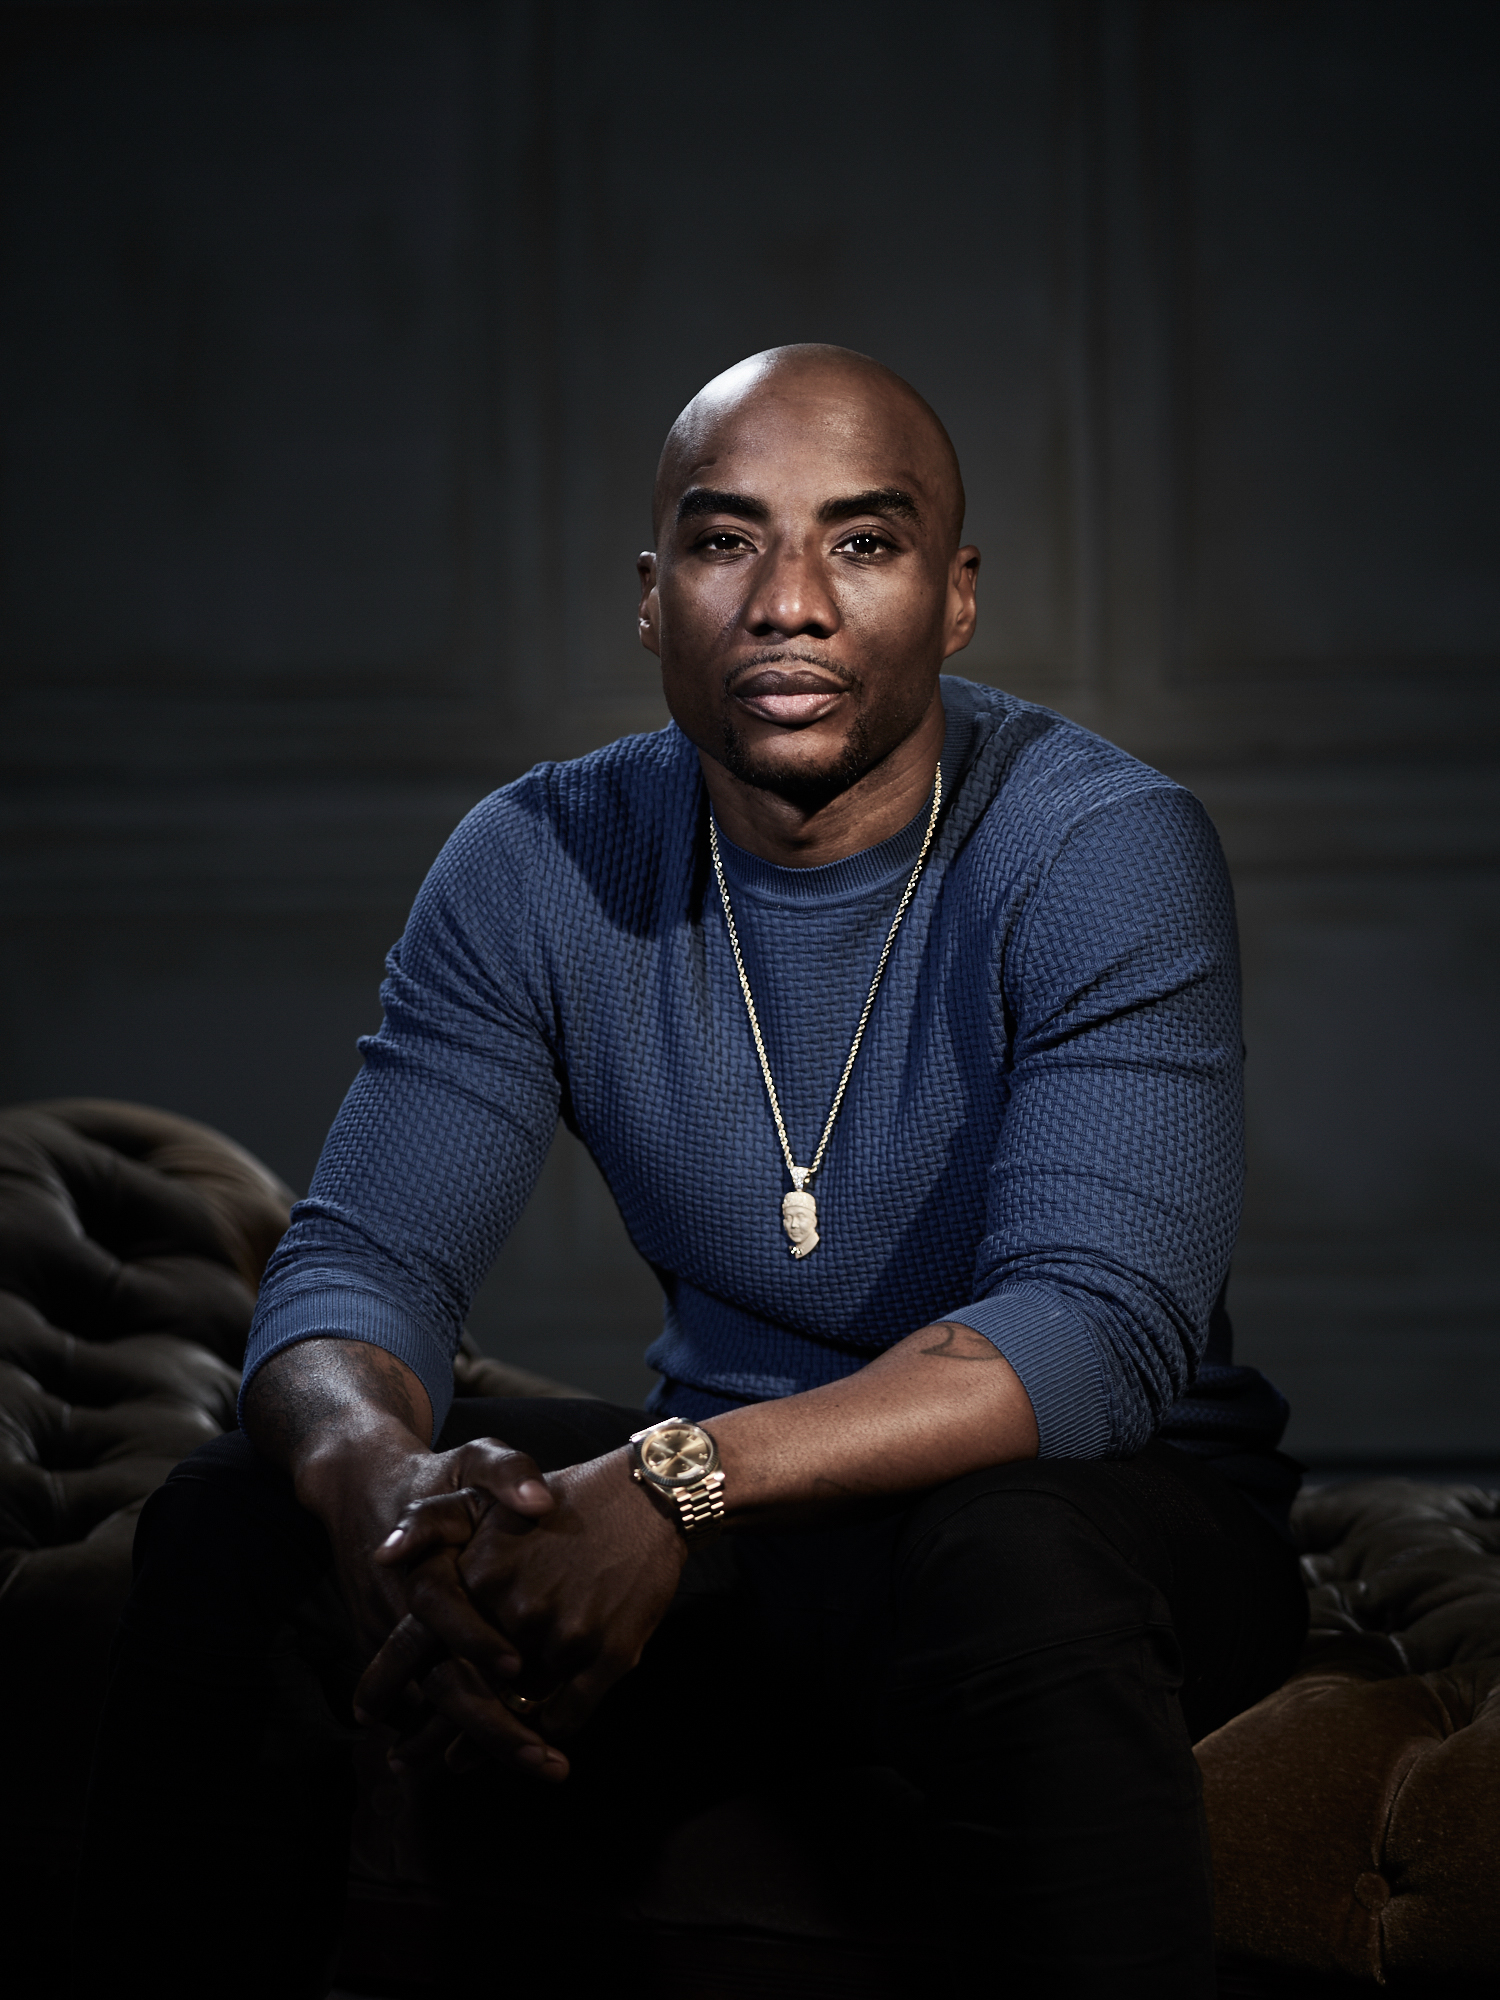 The Hype Magazine Exclusive: Charlamagne tha God One of the Most  Controversial Figures in Hip-Hop Culture Today - The Hype Magazine